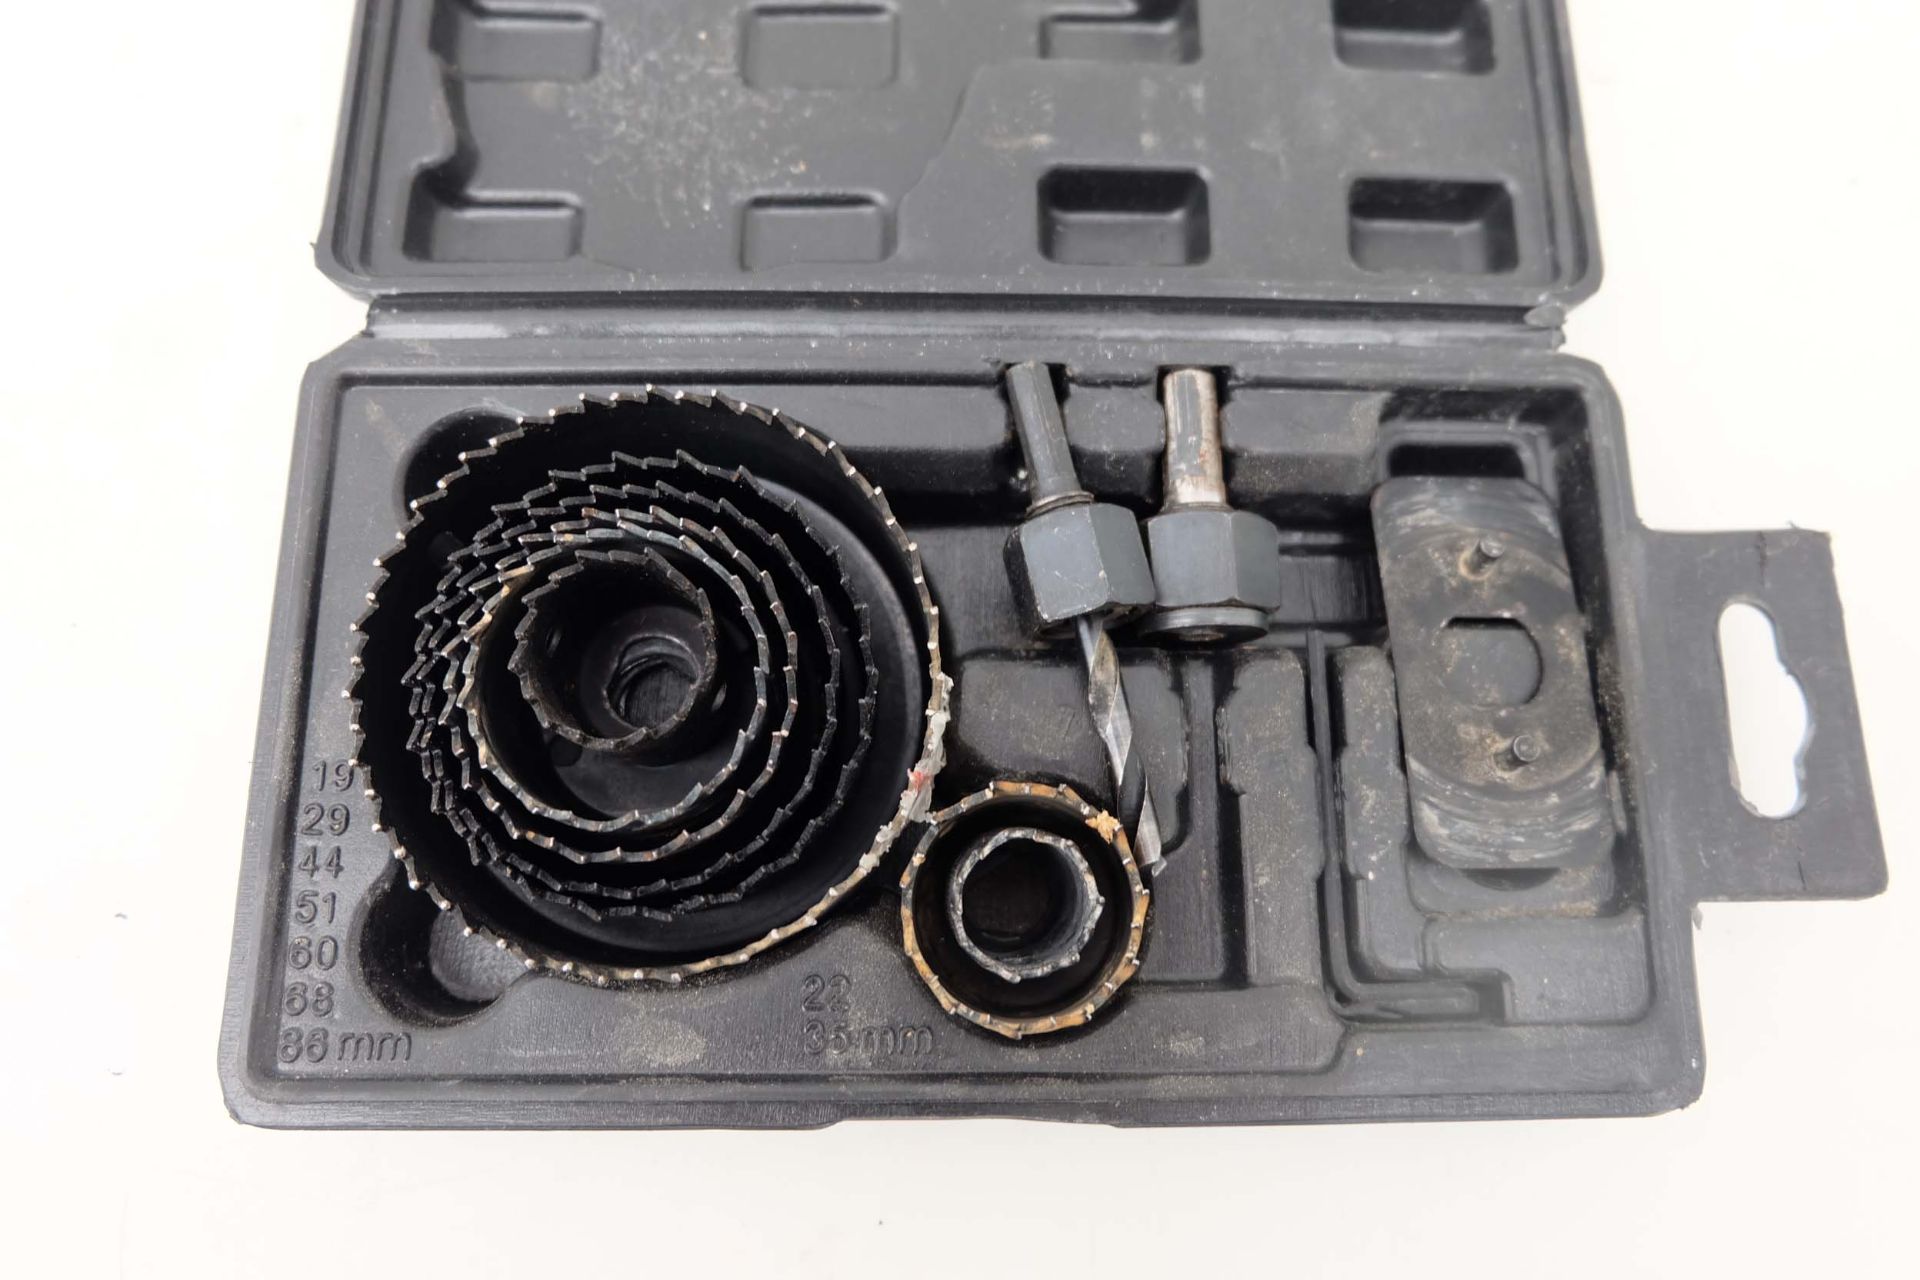 8 Hole Cutters. Sizes 22, 29, 35, 44, 51, 60, 68, 86mm Diameter. In Carry Case.